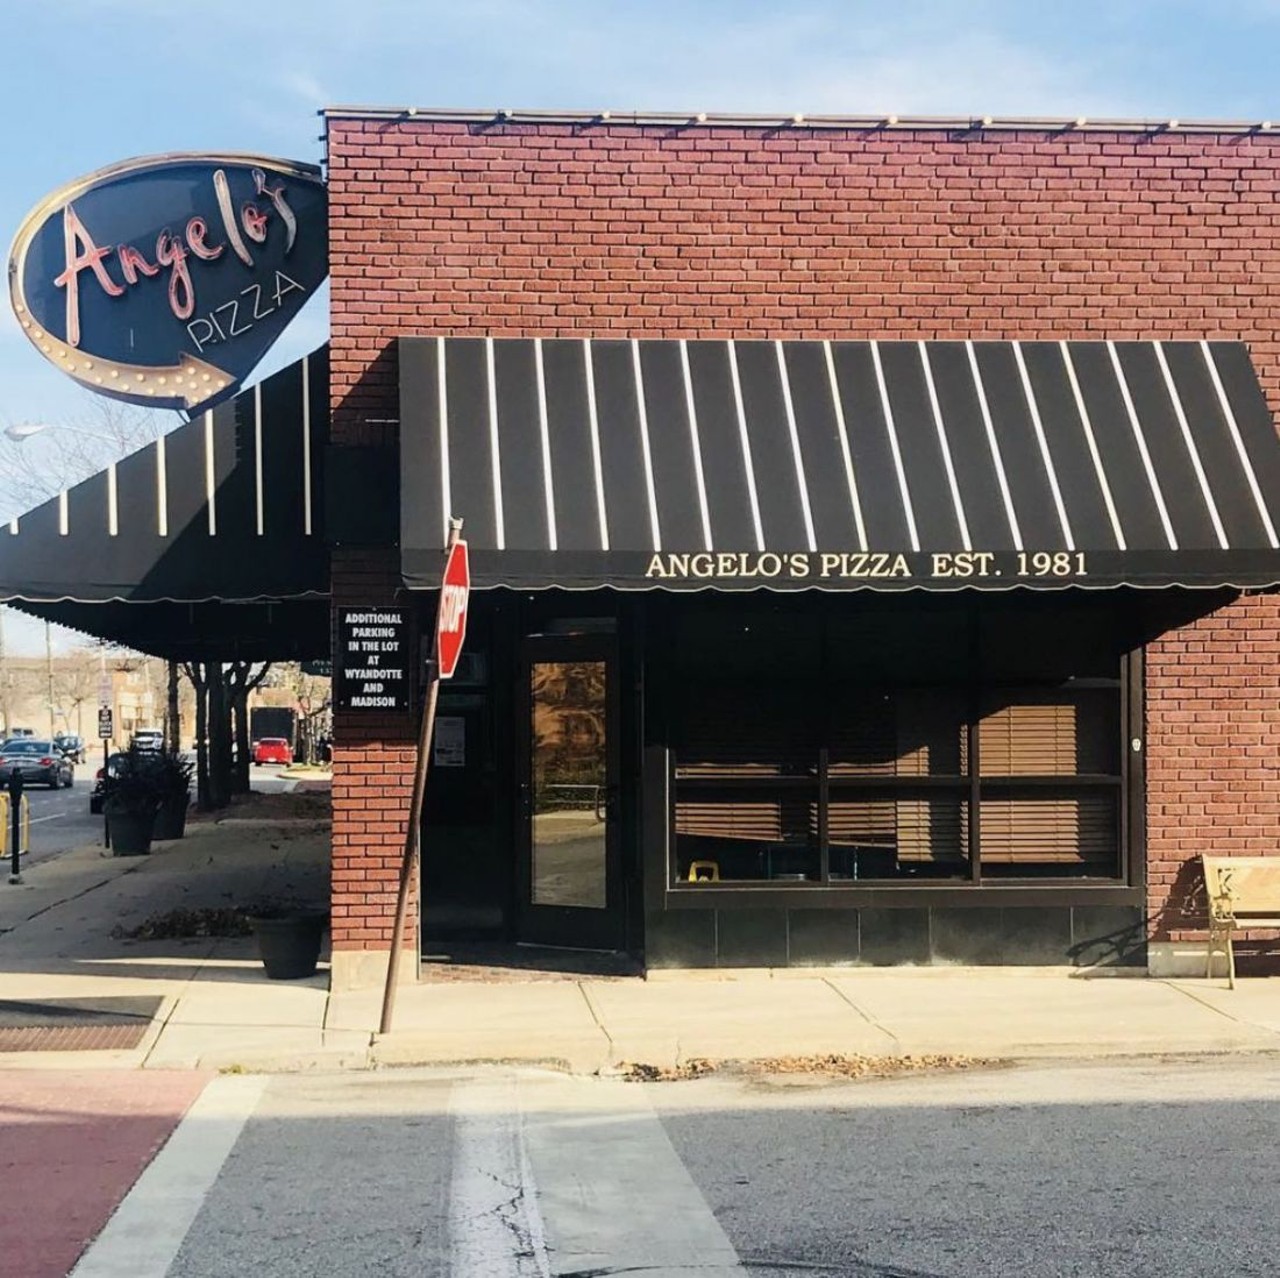  Angelo&#146;s
13715 Madison Ave., Lakewood
For the best pizza in Lakewood, and arguably all of Northeast Ohio, Angelo&#146;s on Madison is the spot. Whether you stay traditional and stick to the normal pepperoni or cheese or get crazy with a Philly cheese steak or baked potato pizza, you really can&#146;t go wrong.
Photo via @E.ScruggsJR/Instagram